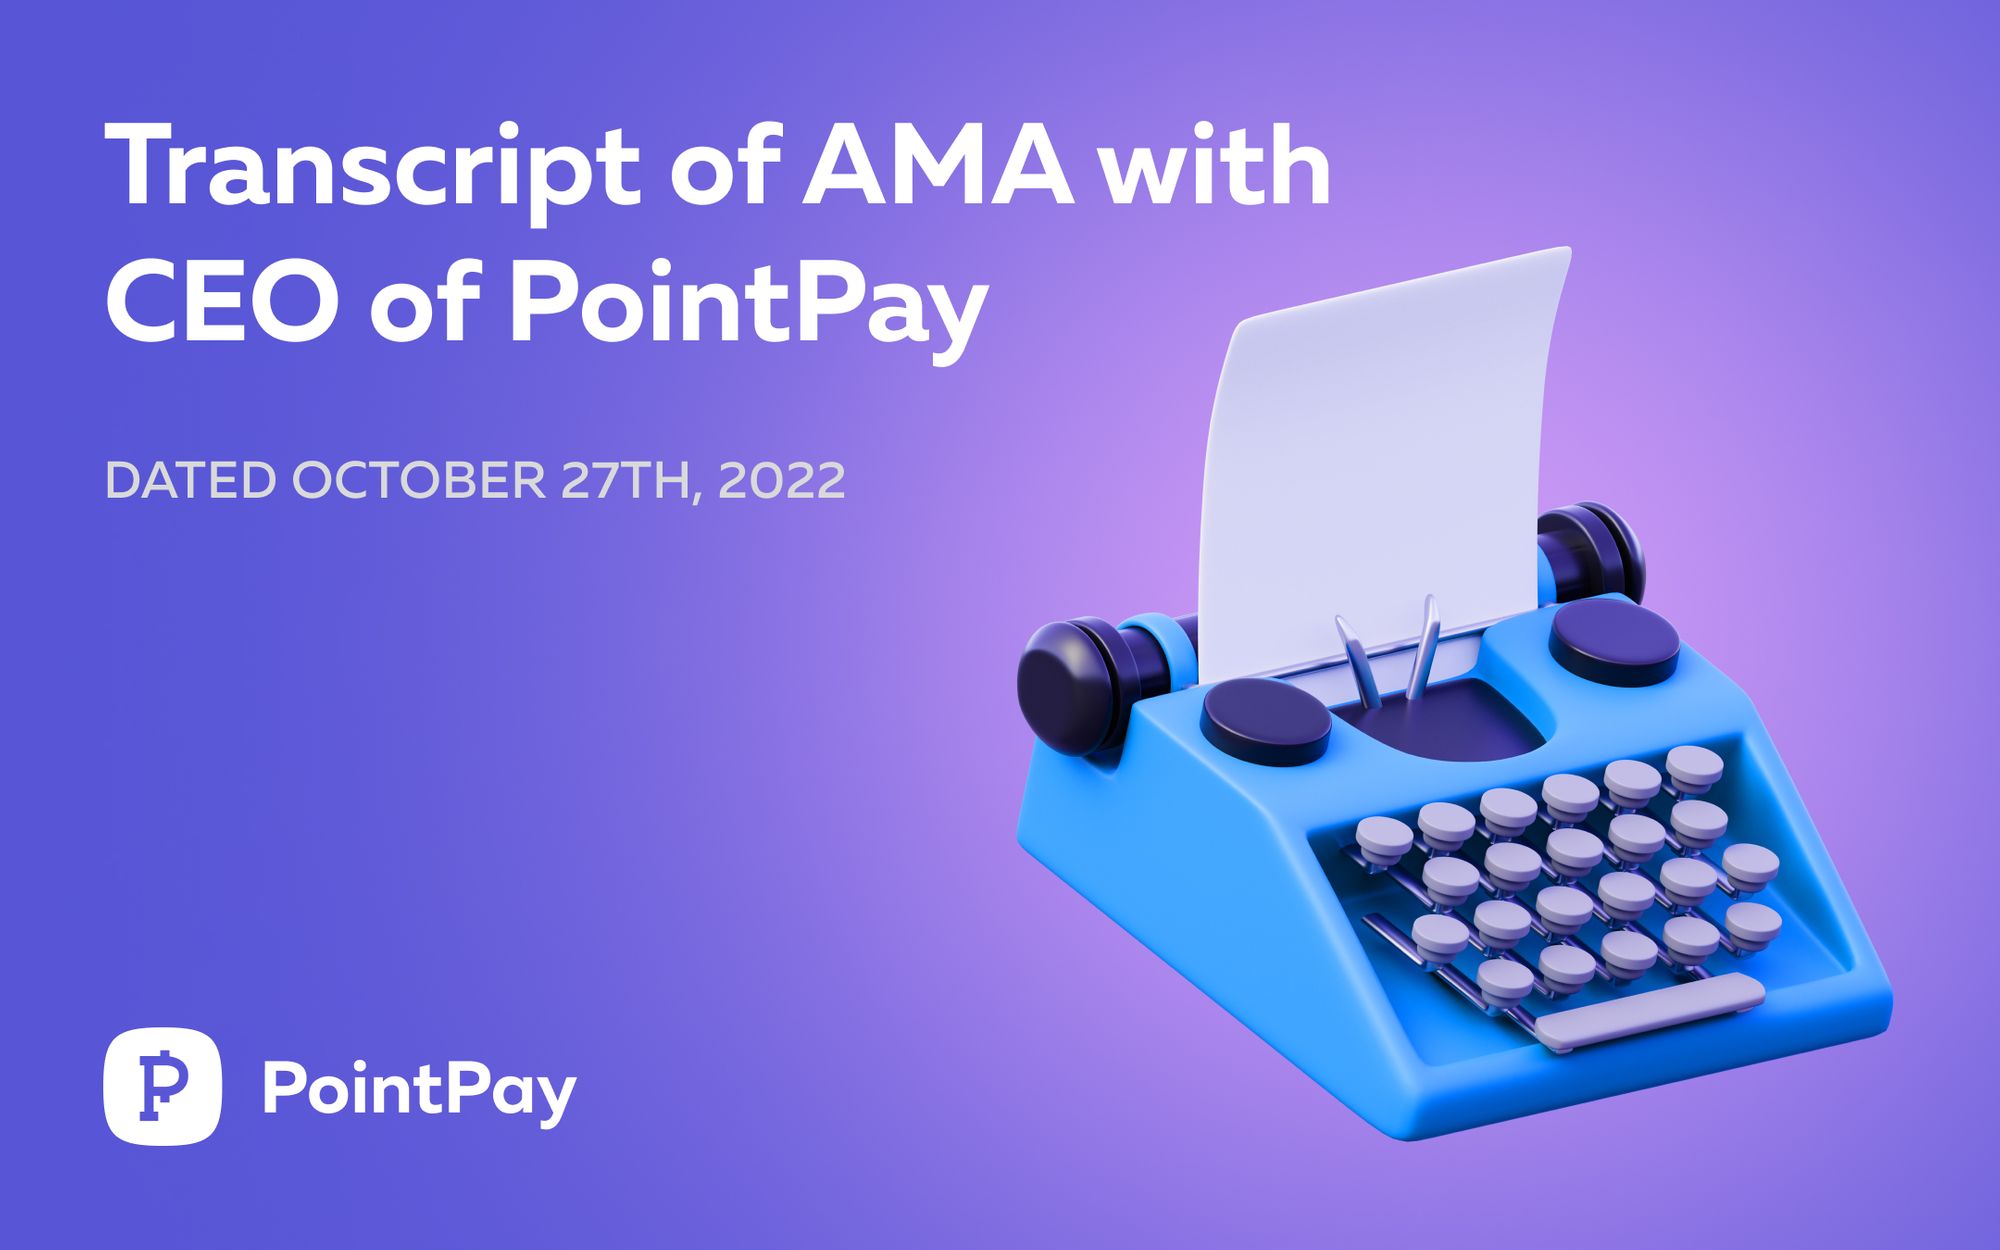 Transcript of AMA with CEO of PointPay – Vladimir Kardapoltsev